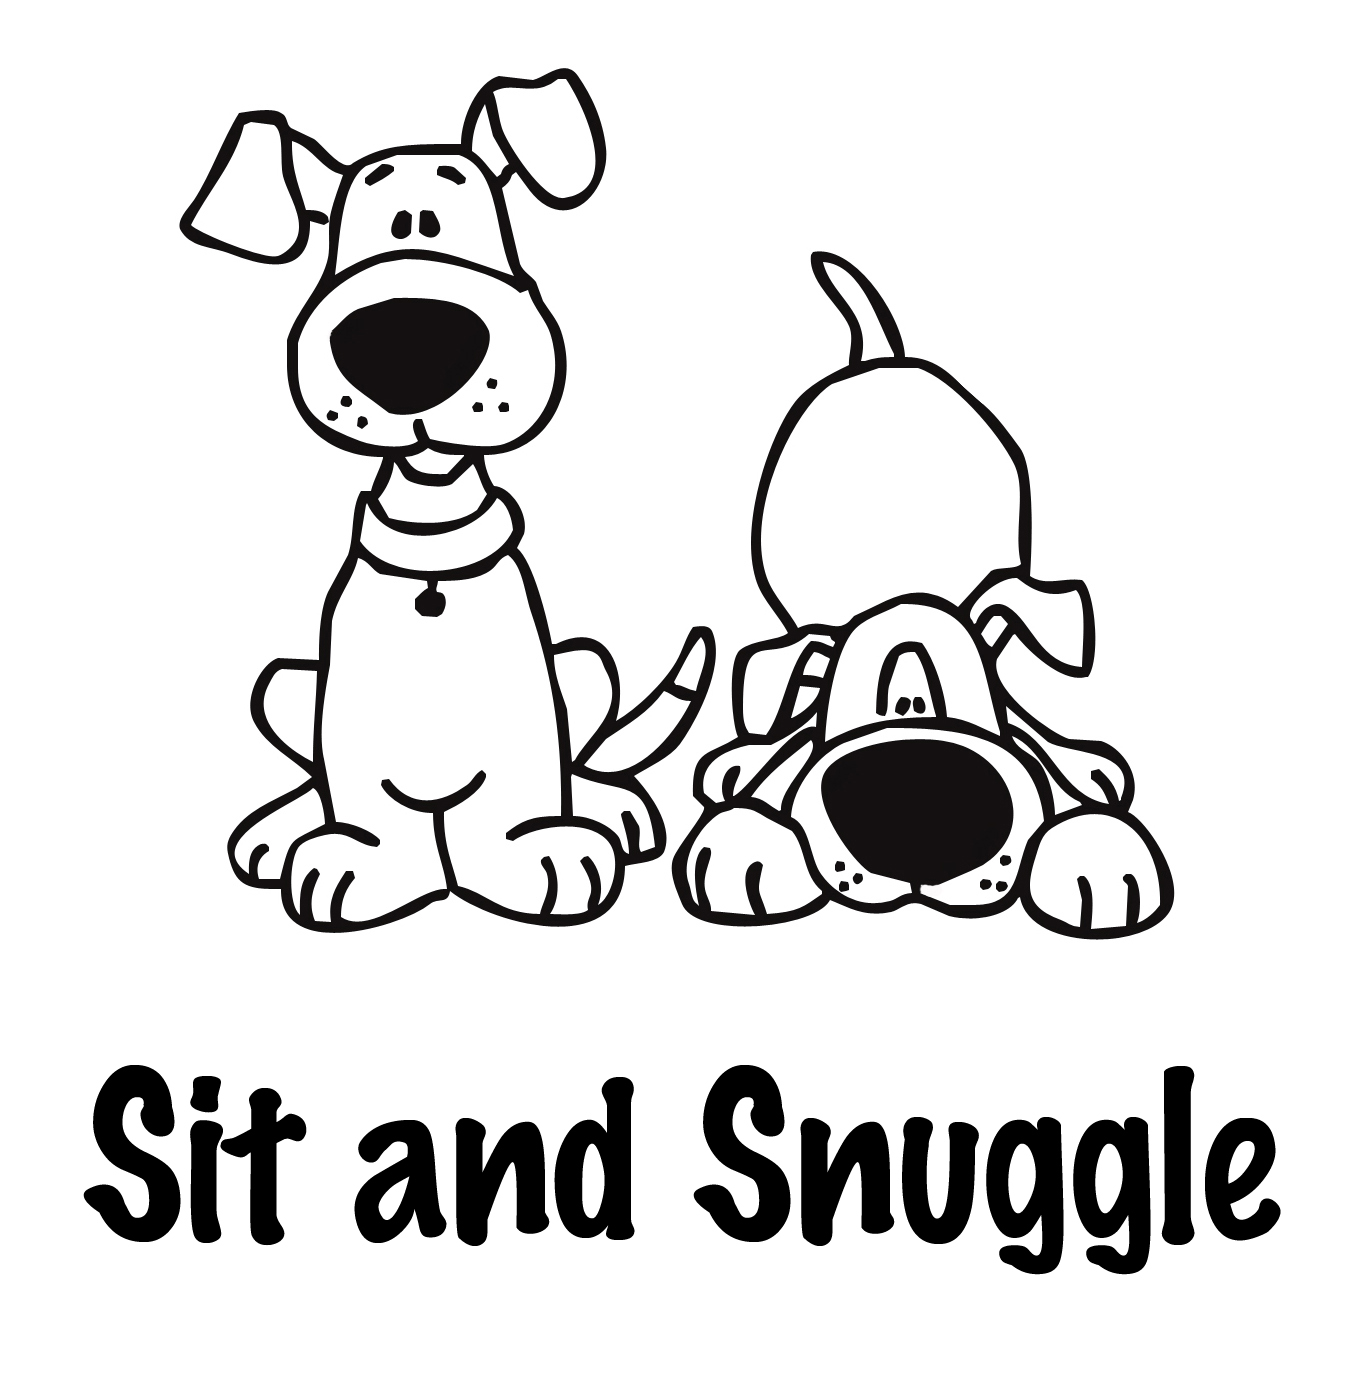 Sit and Snuggle